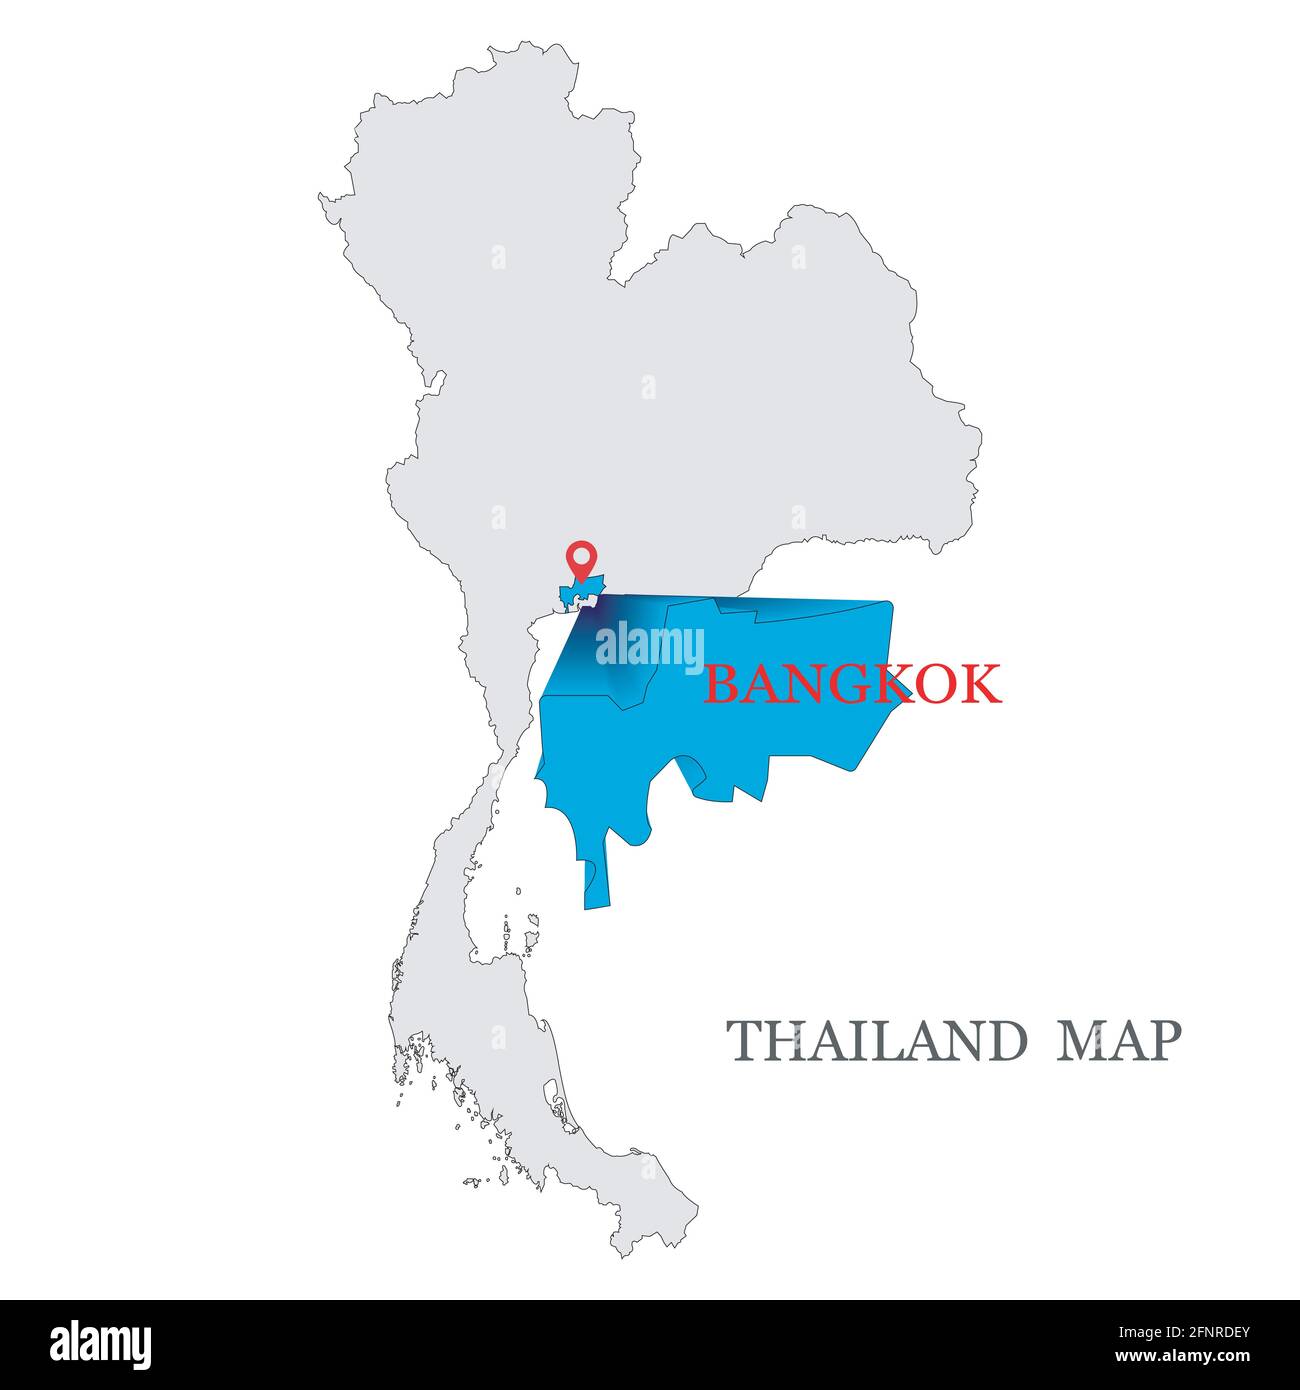 Maps of Thailand with red maps pin on blue color of Bangkok province Stock Vector